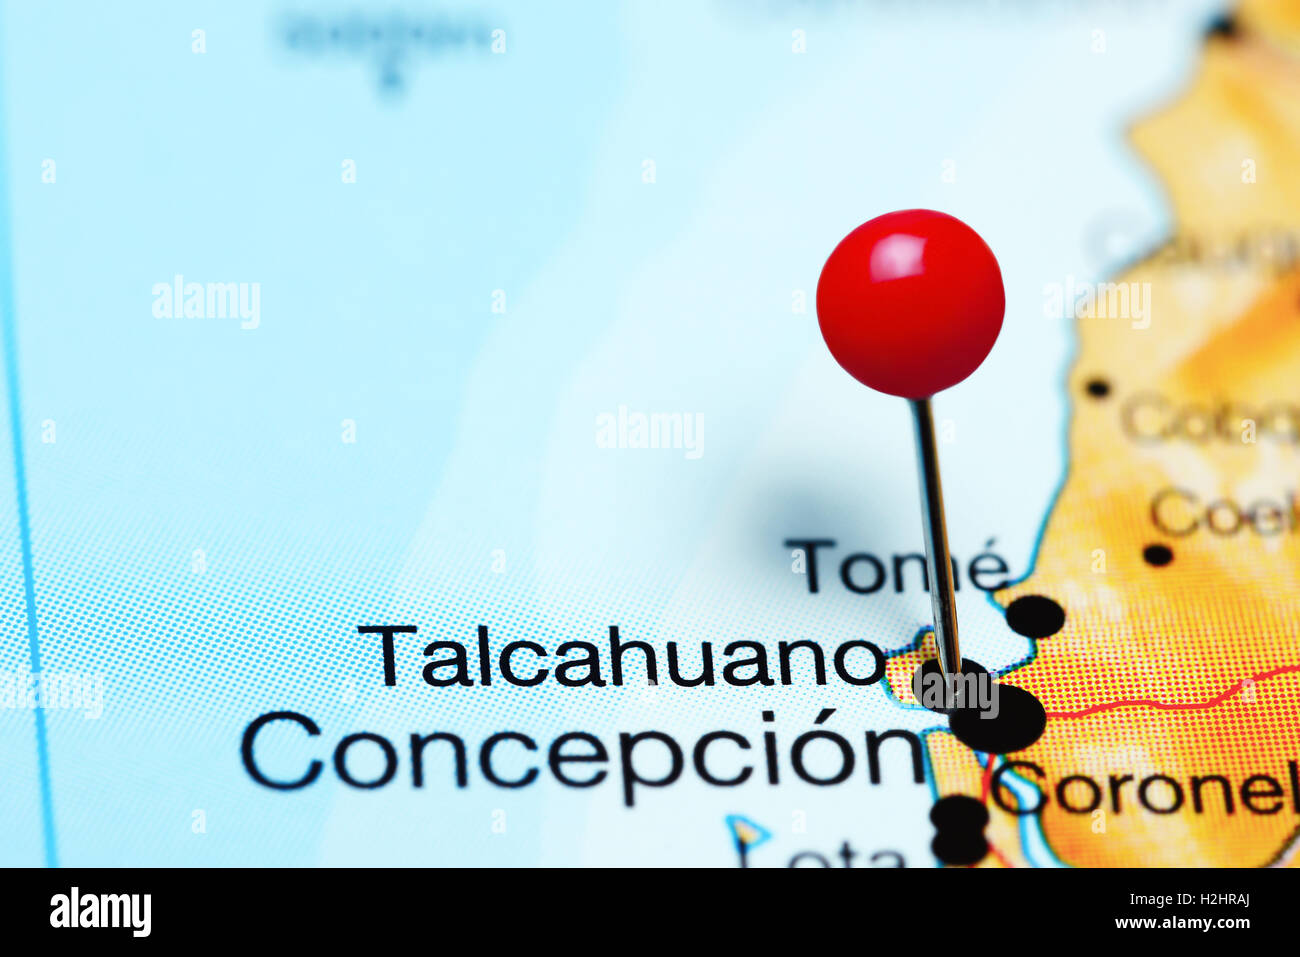 Talcahuano pinned on a map of Chile Stock Photo